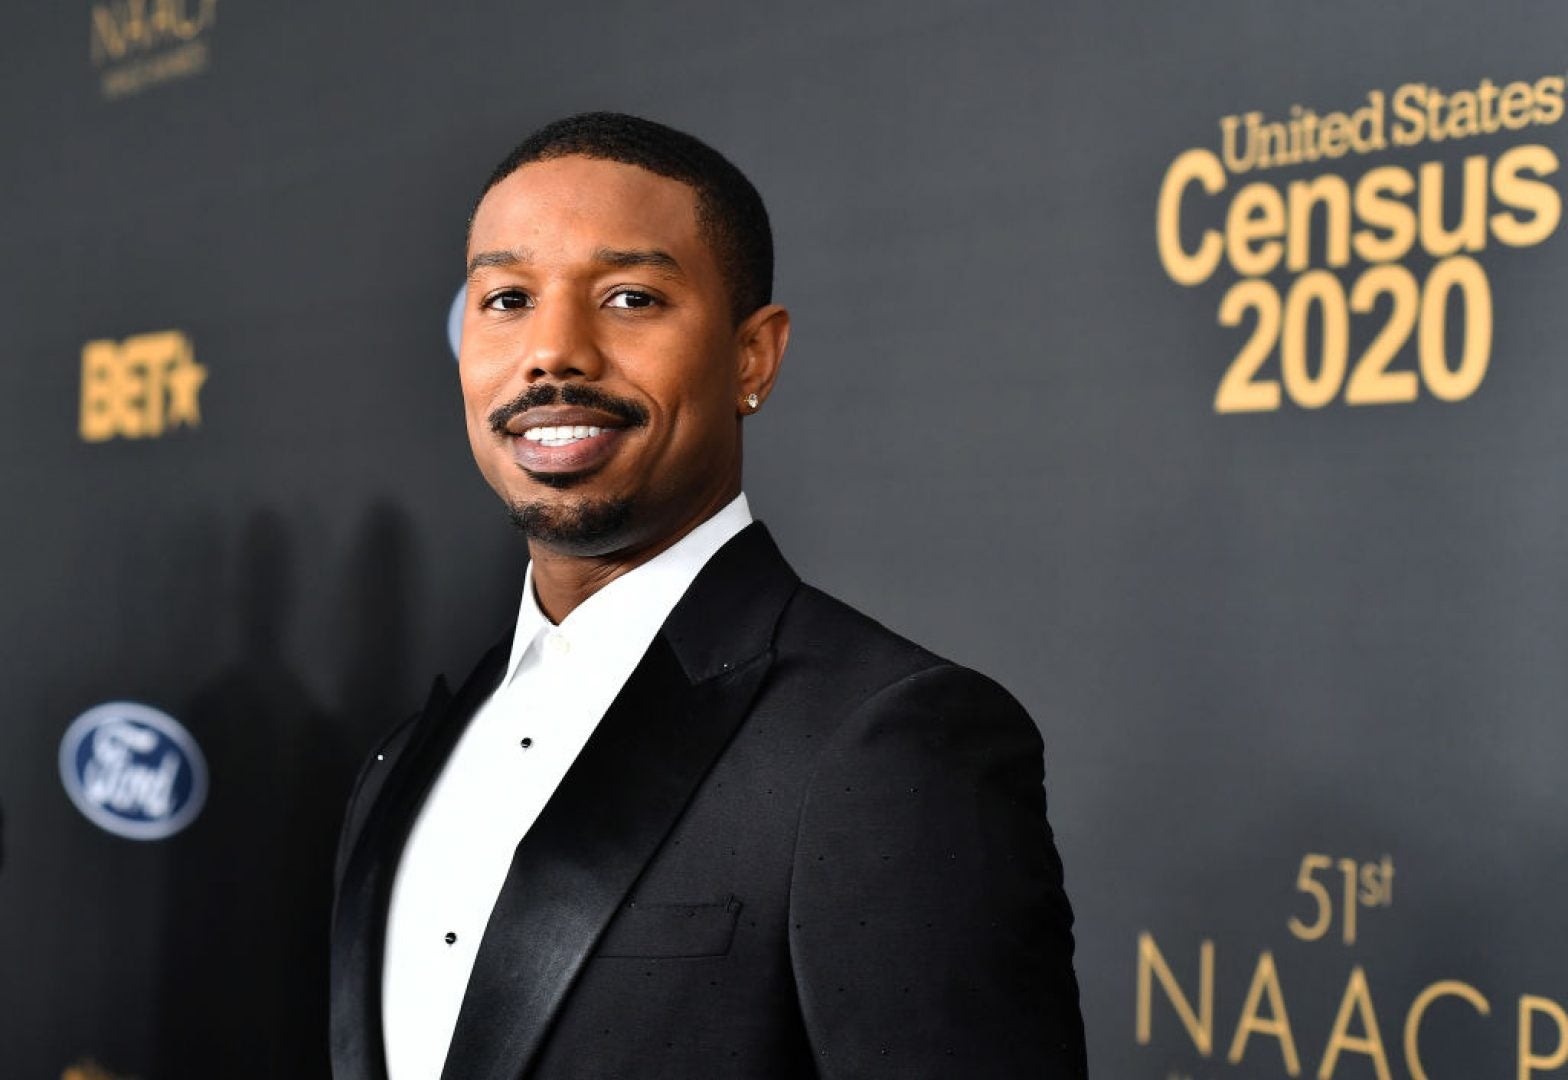 Being "Extremely Happy" Behind Michael B. Jordan's Decision To Make His Love For Lori Harvey Public